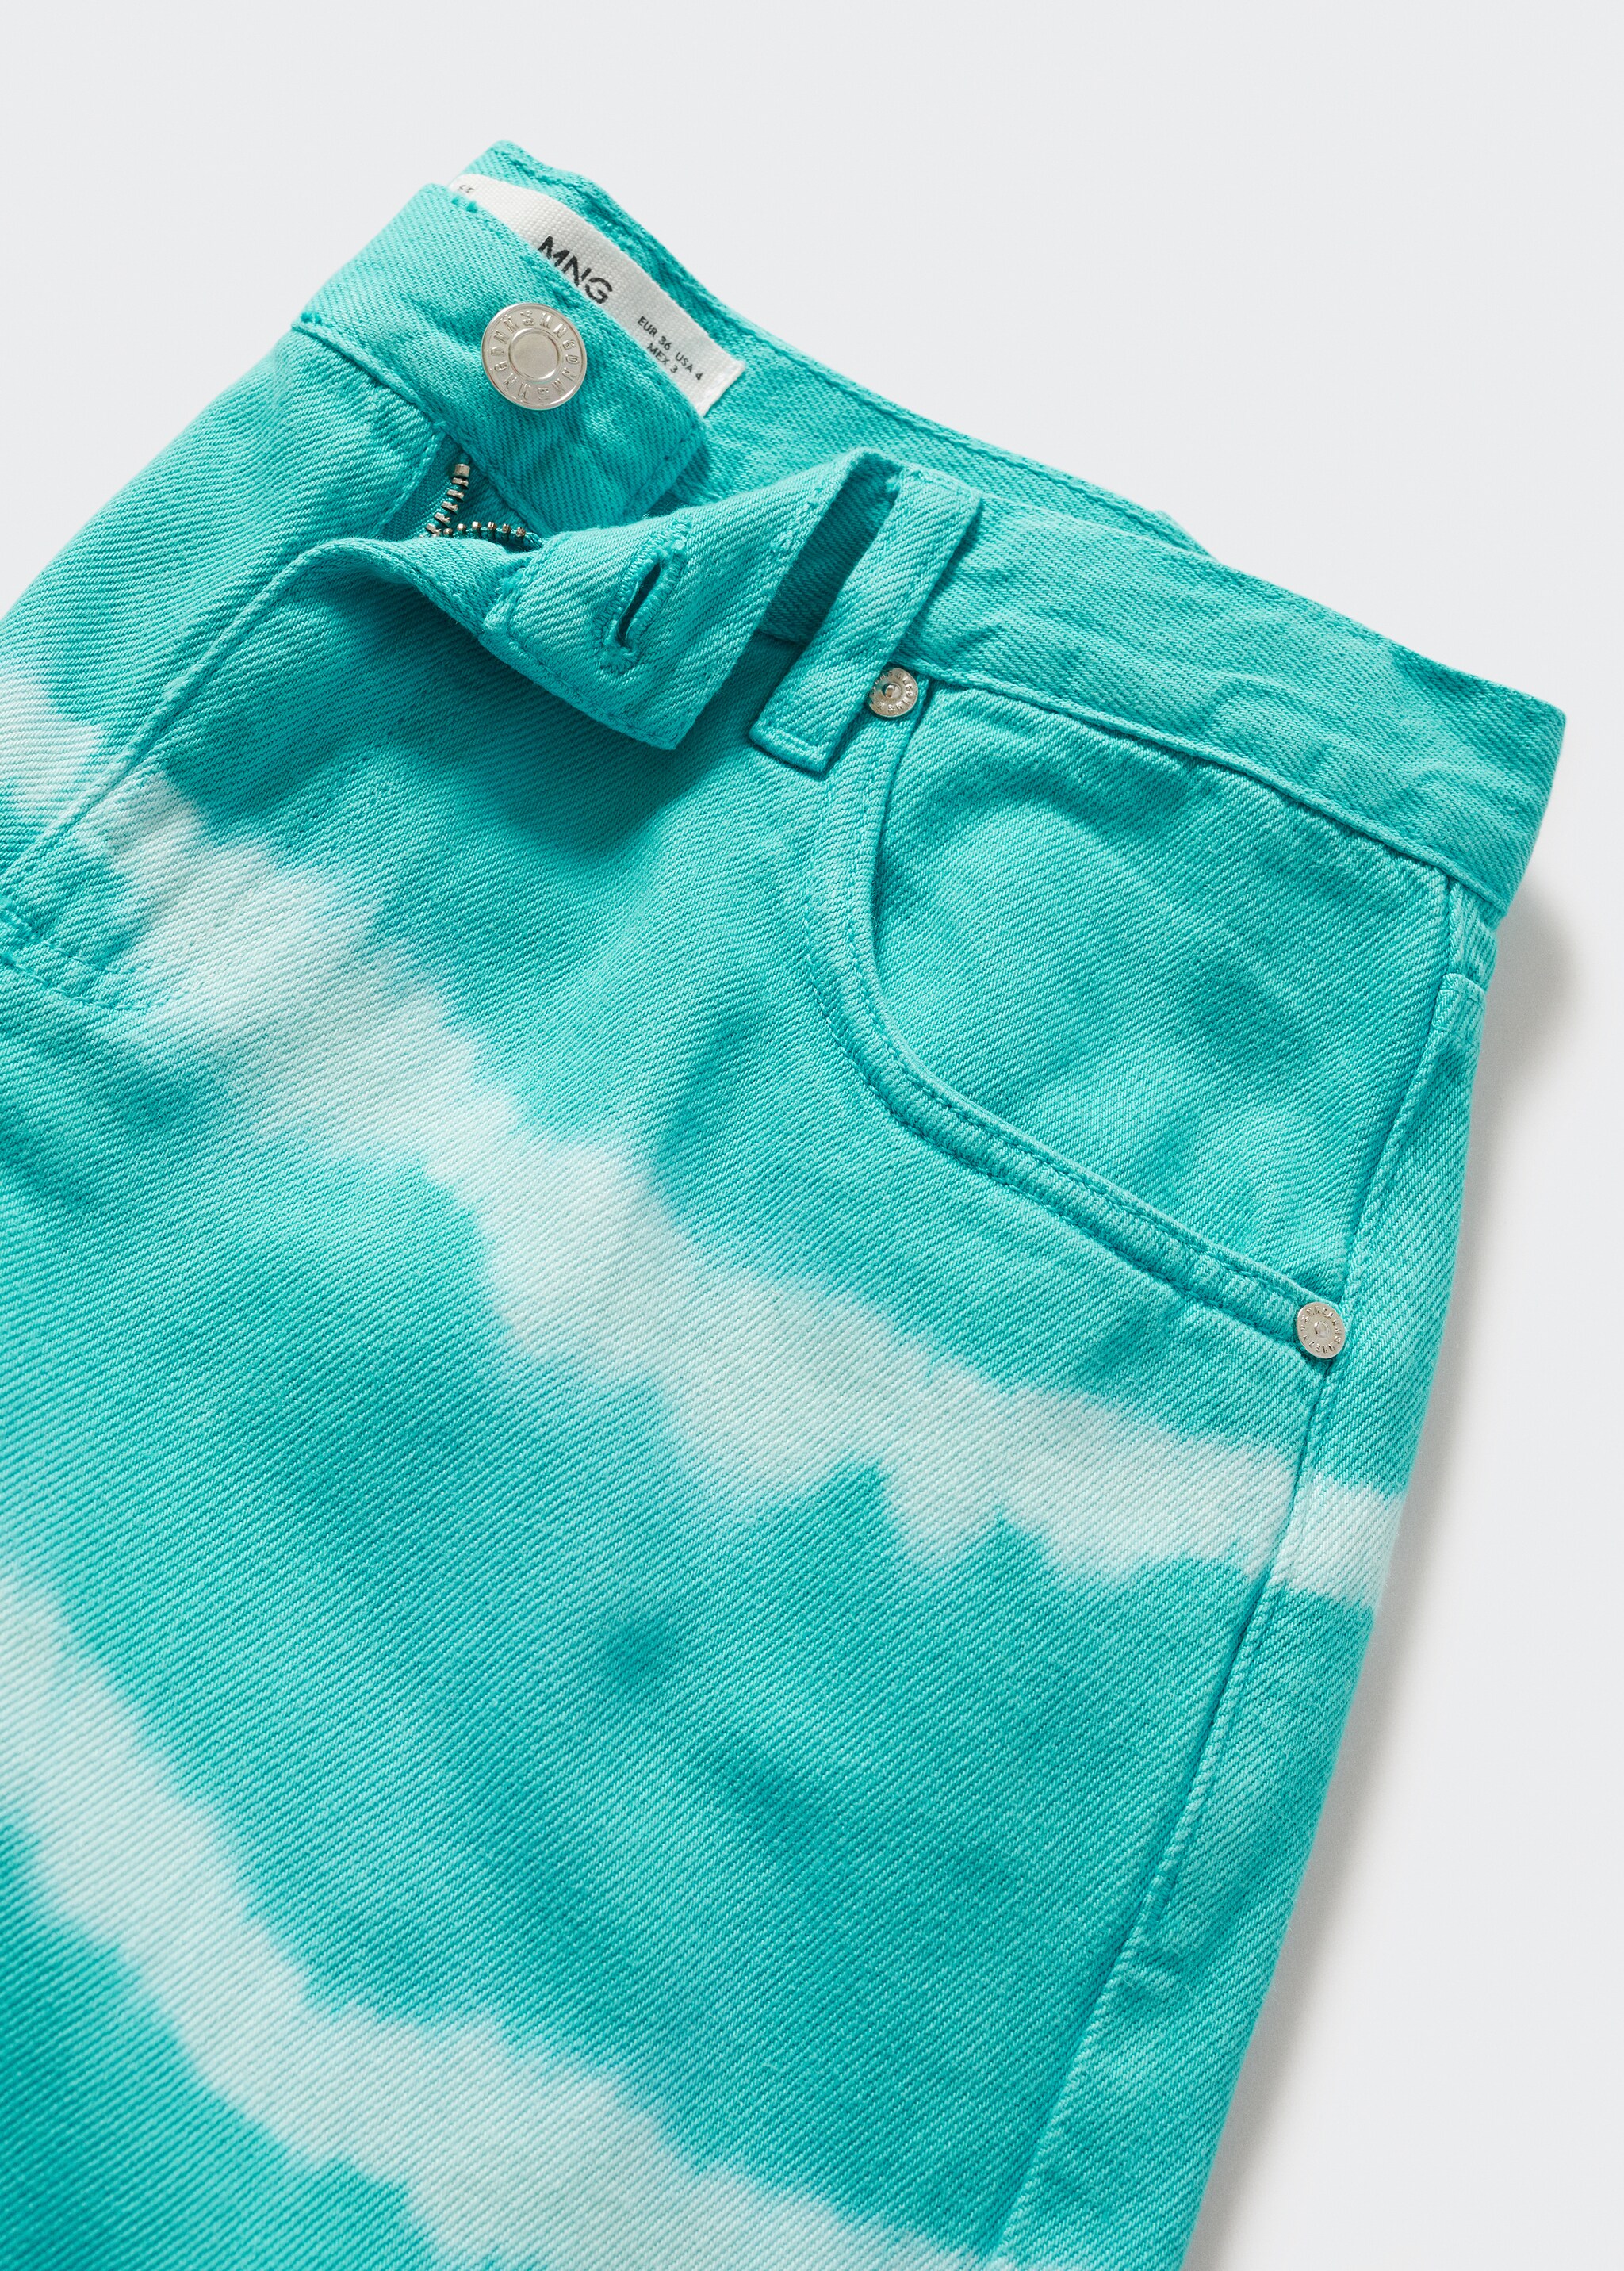 Shorts tie-dye - Details of the article 8